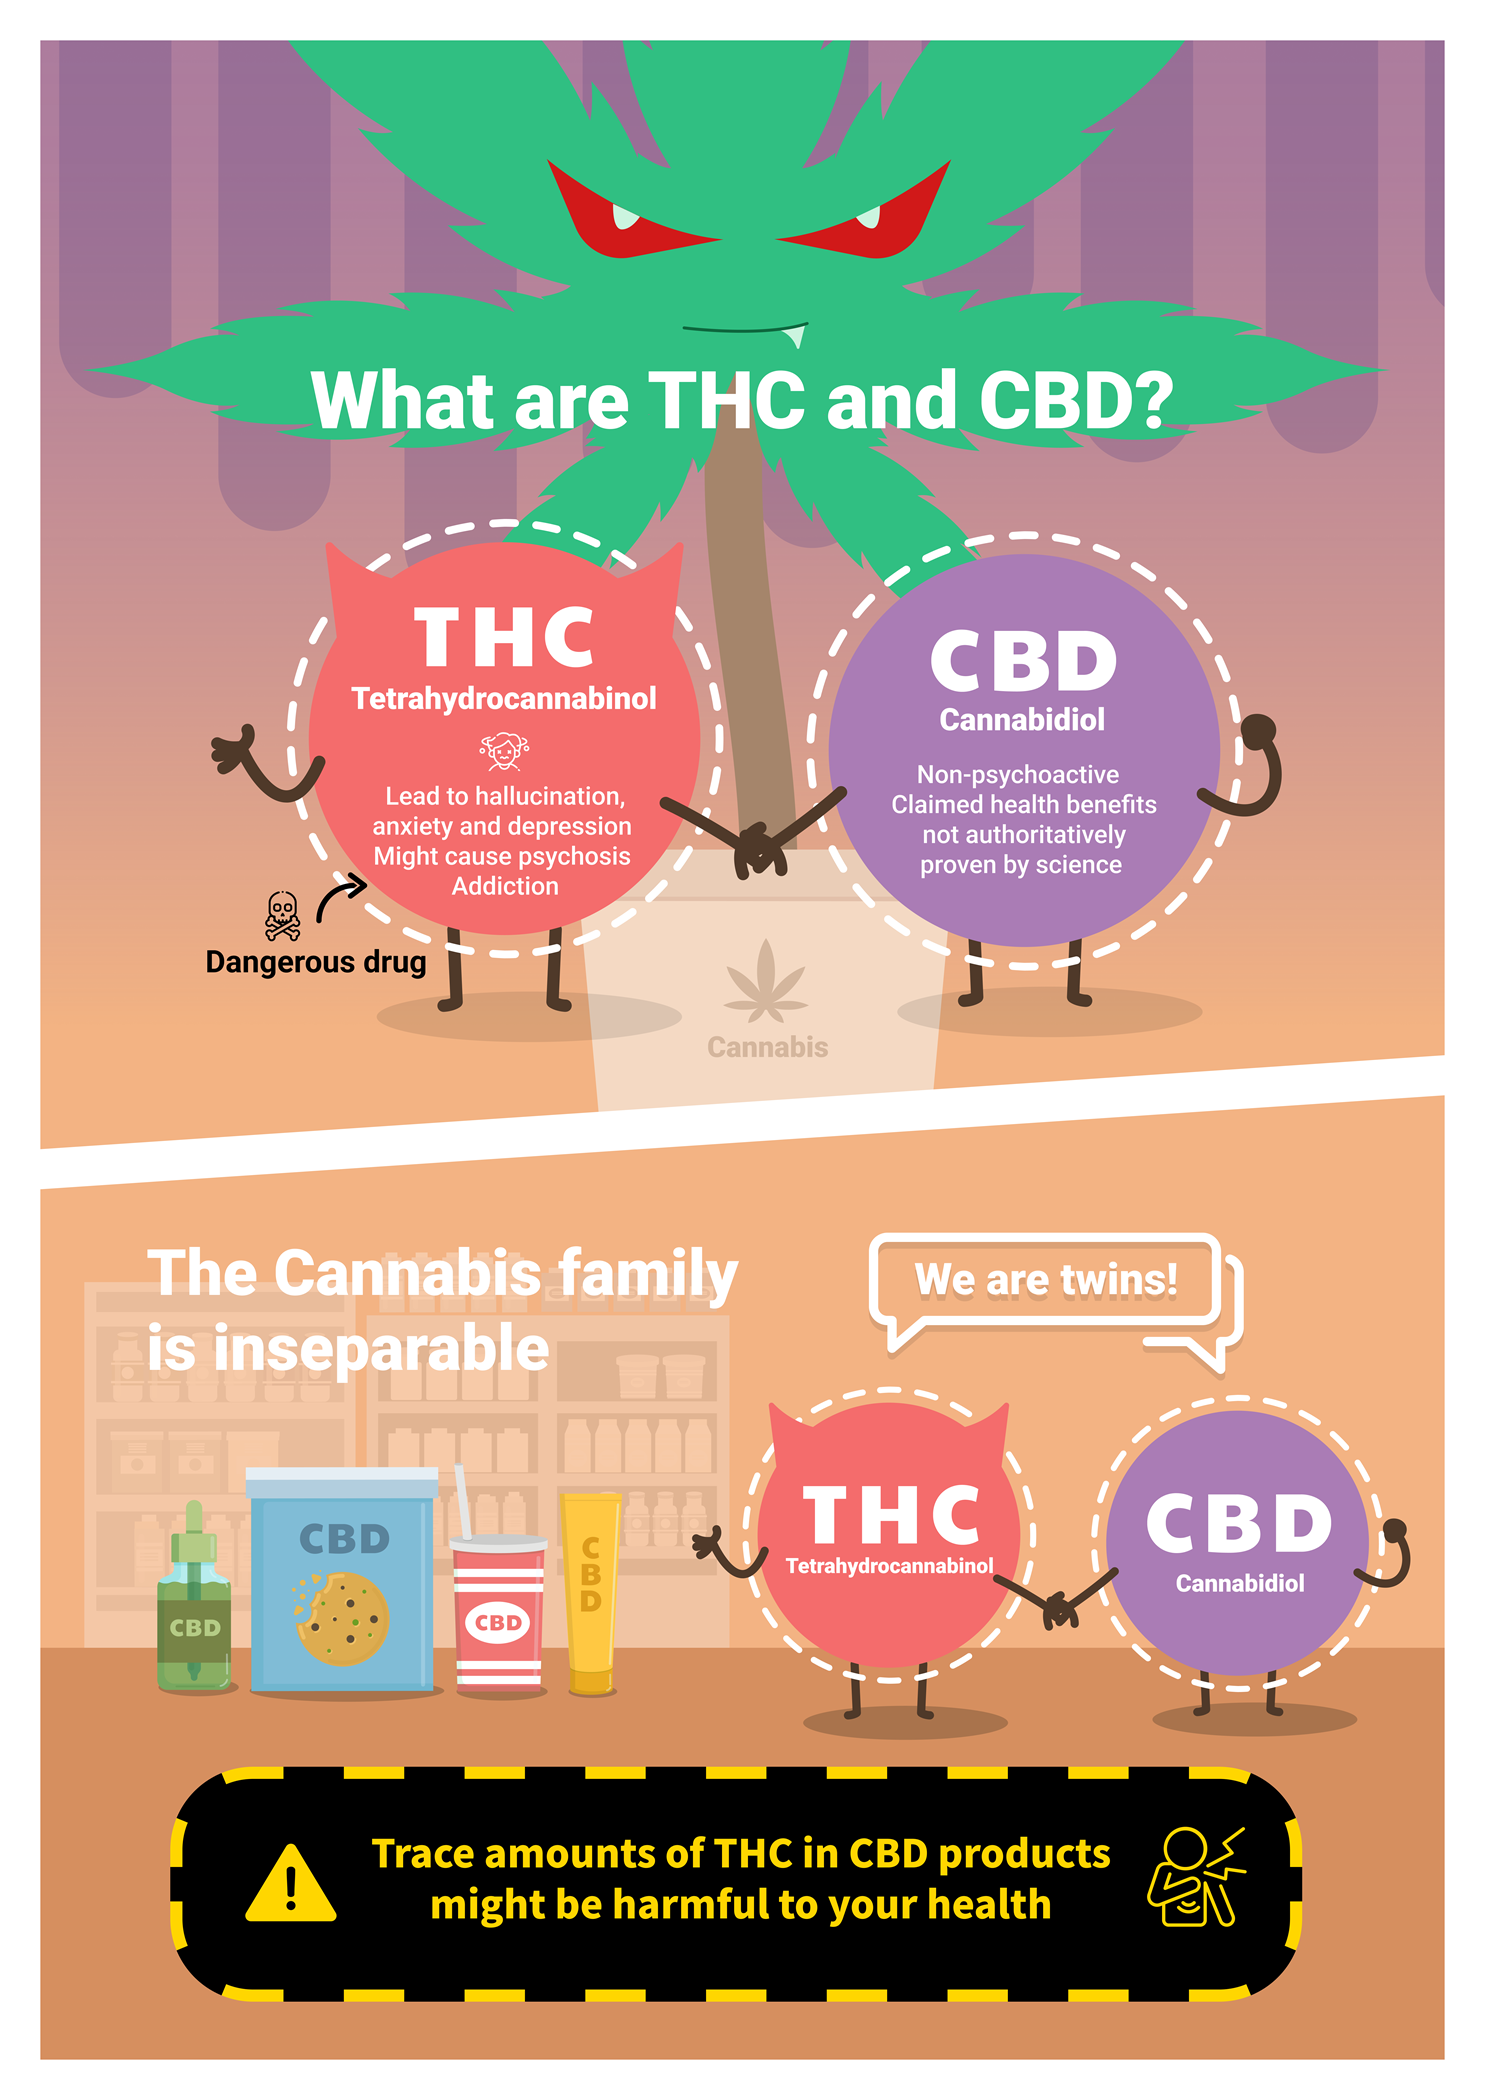 What are THC and CBD?
